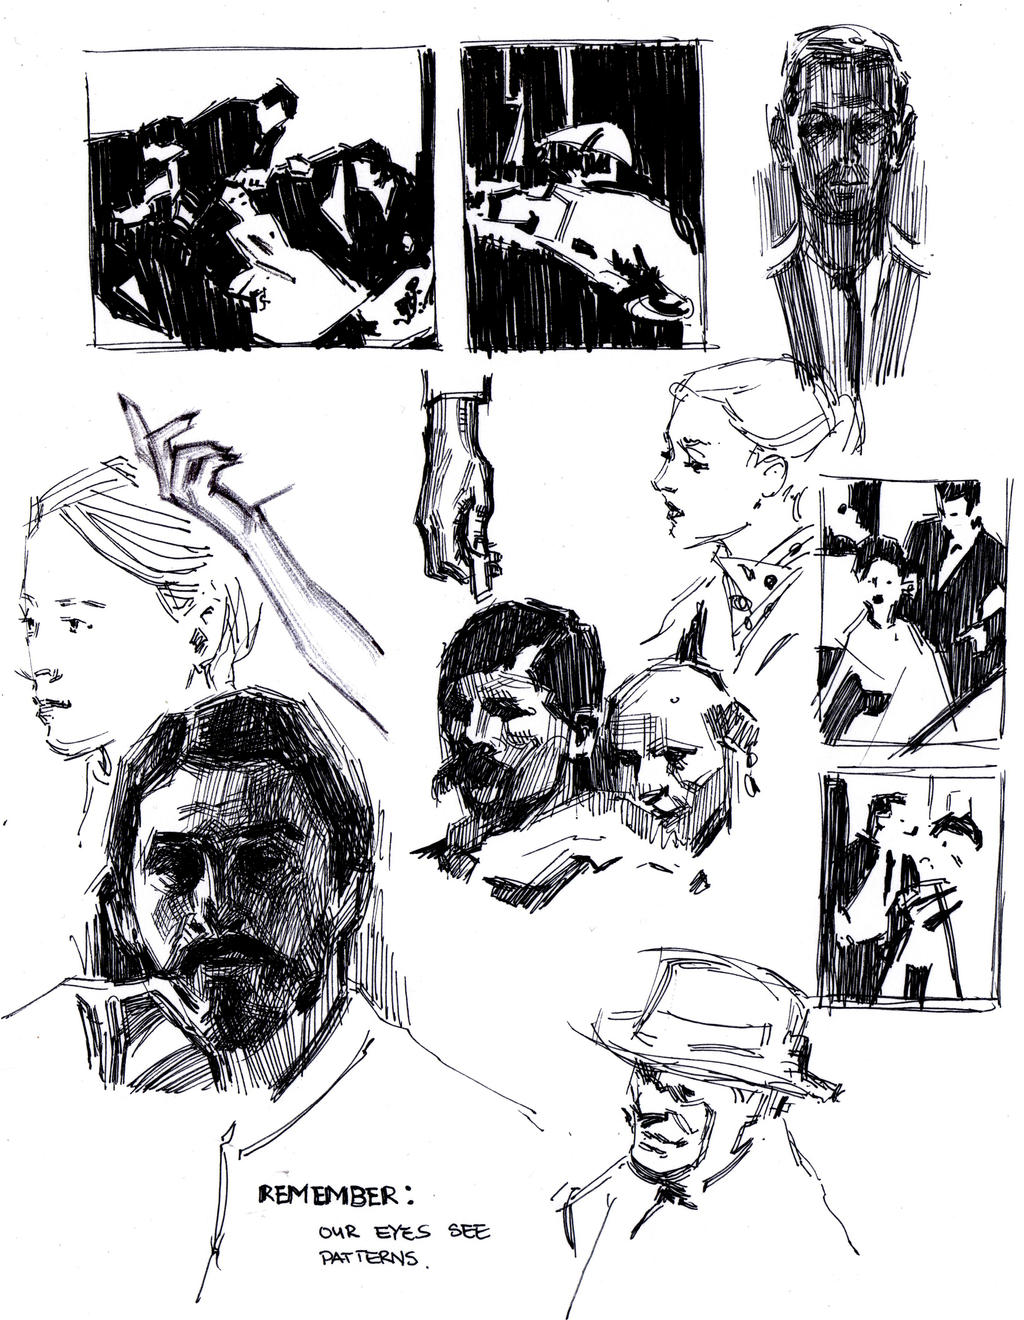 3 by 5 sketchbook page 18